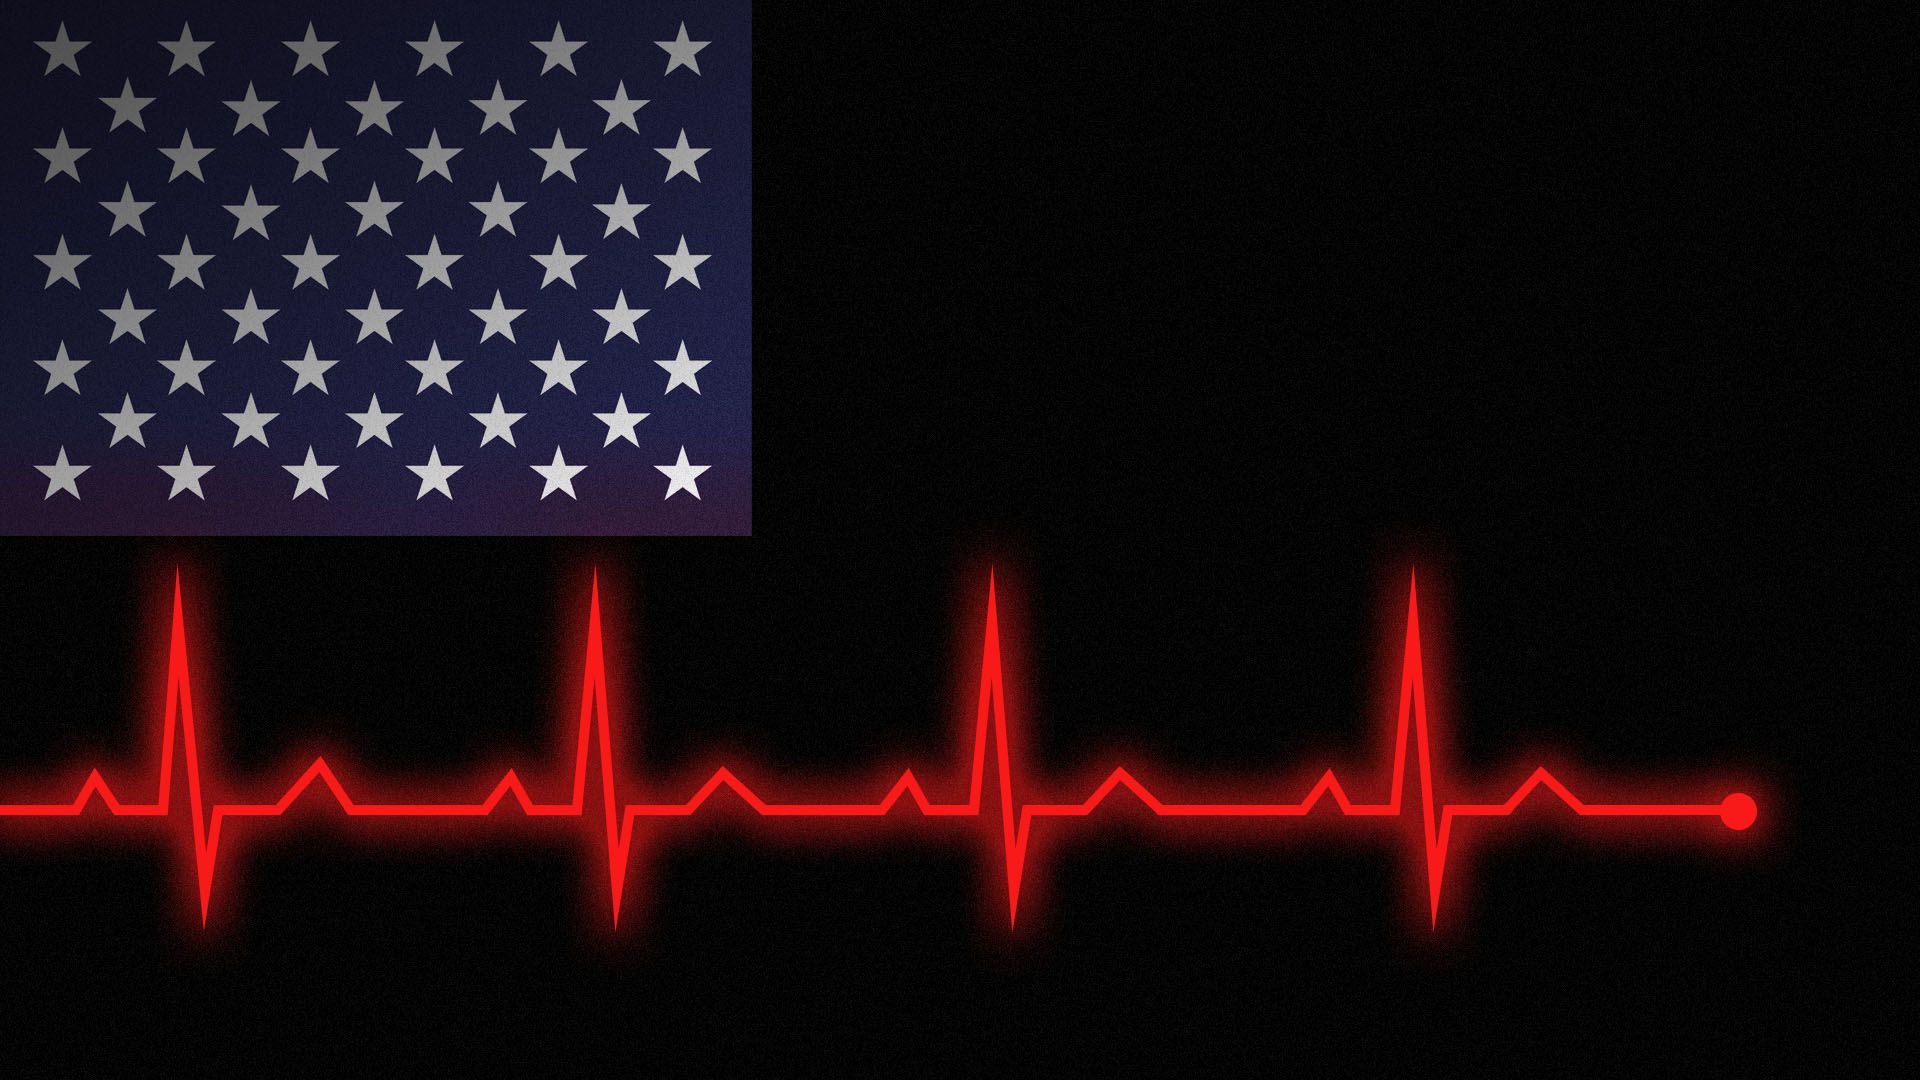 Illustration of the American flag as an EKG monitor